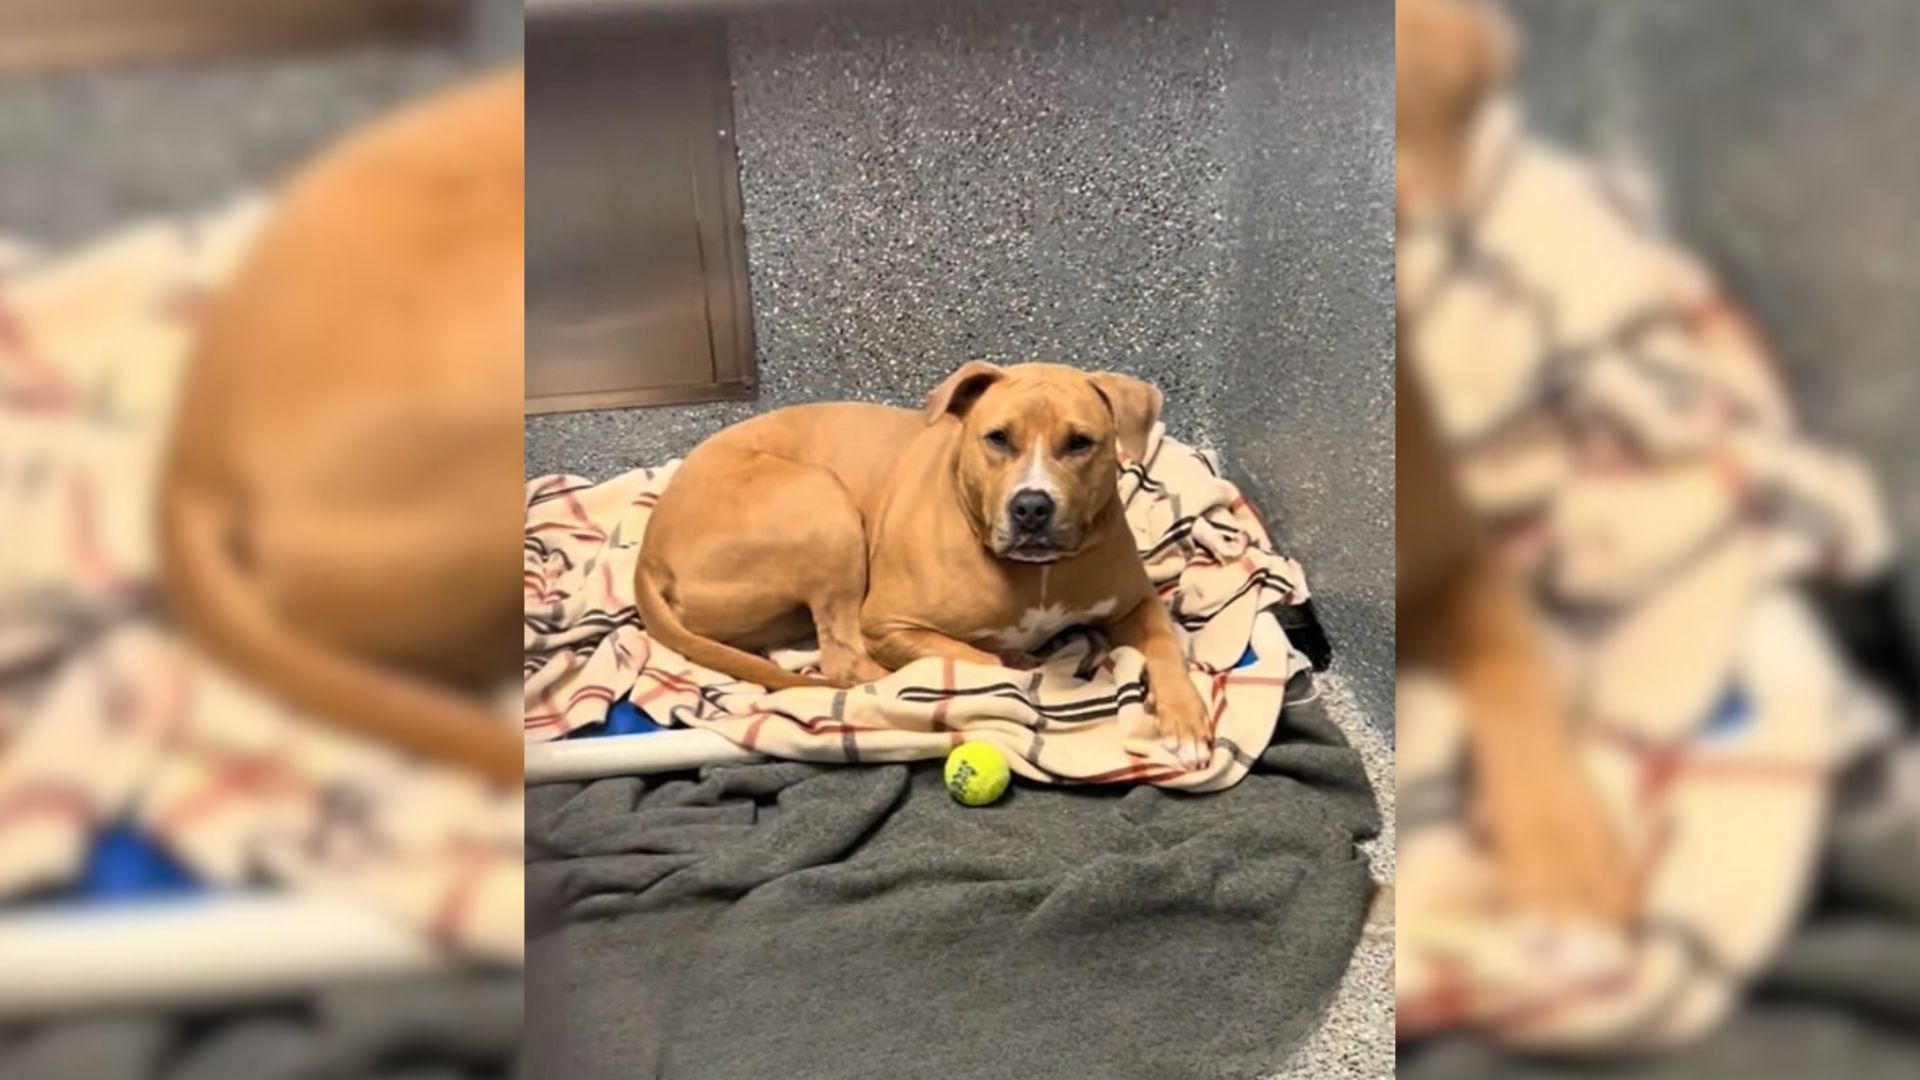 A Dog Returned To A Shelter Waited Over 380 Days Before Getting A New Chance